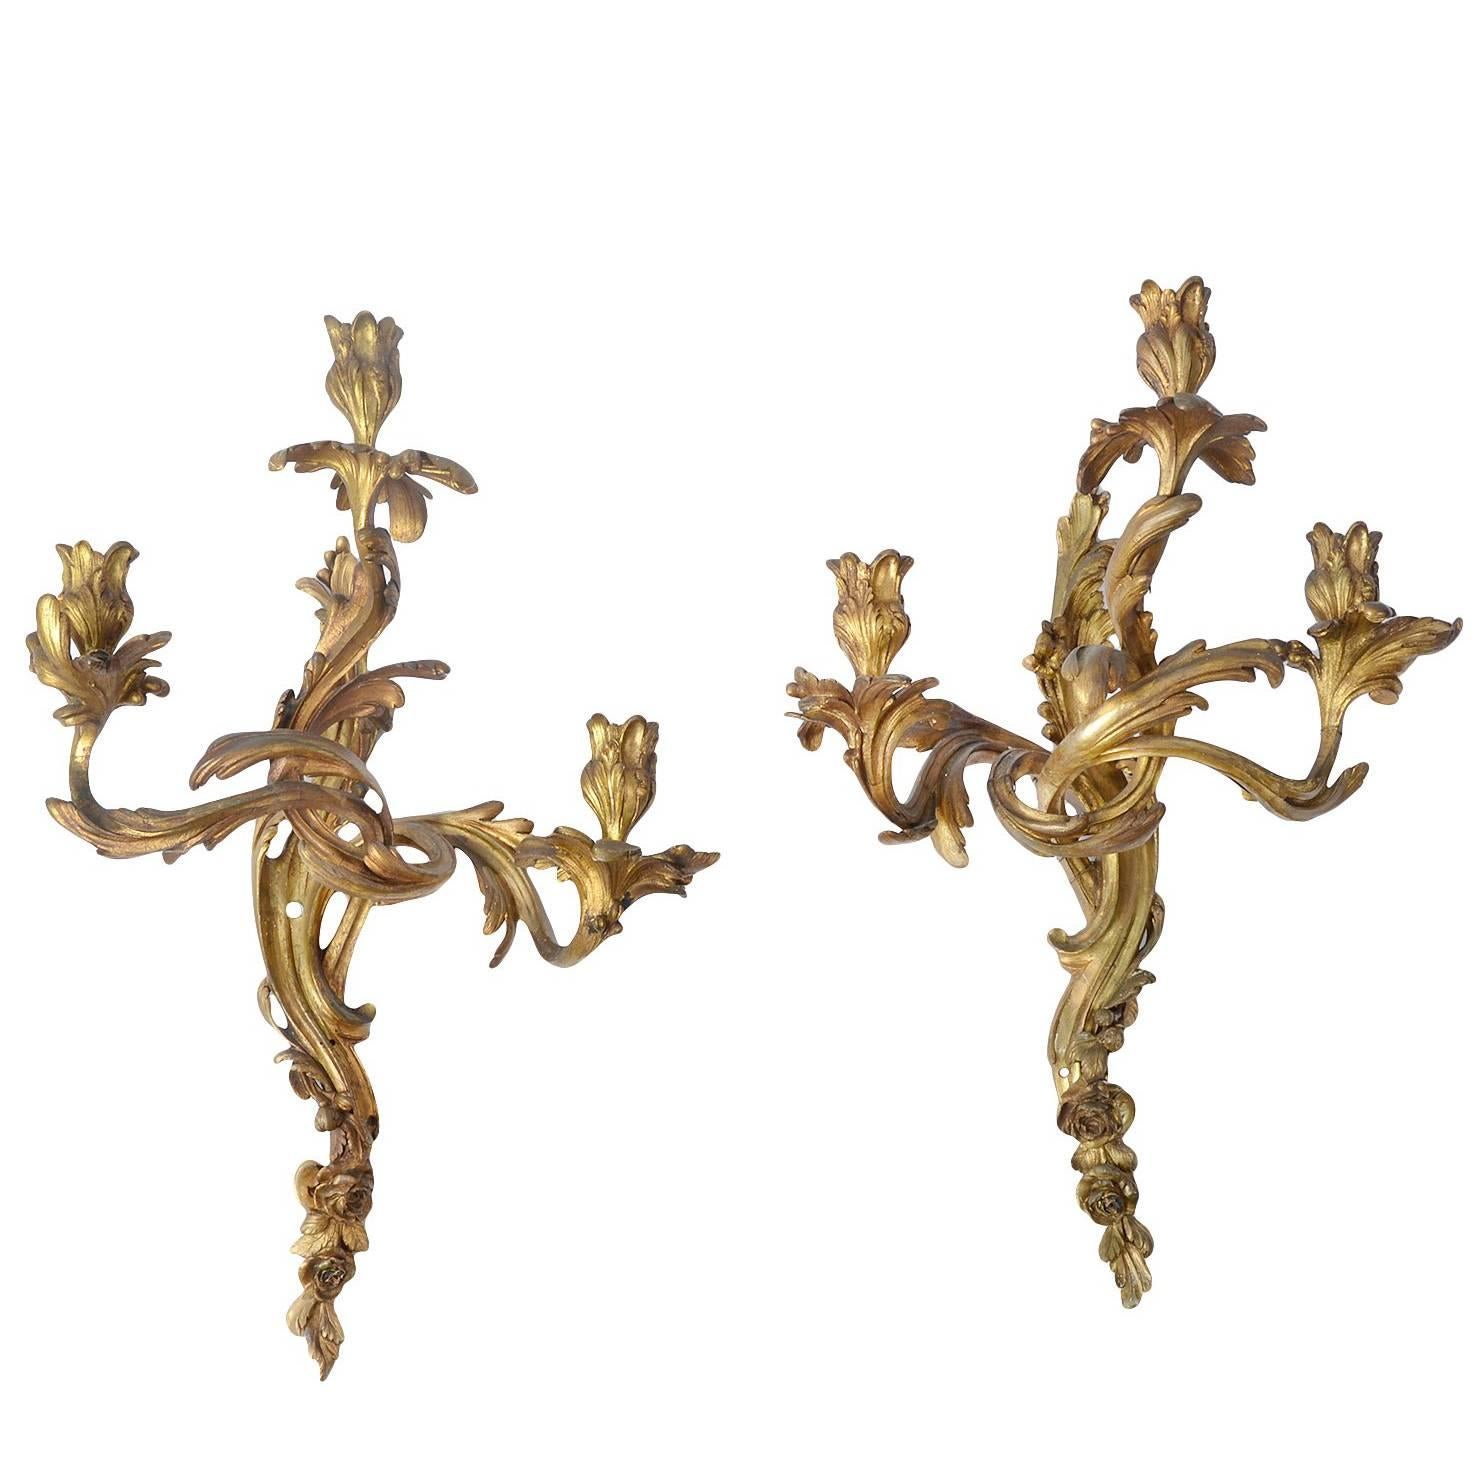 Pair of French Mid-19th Century Louis XV Style Gilt Bronze Sconces